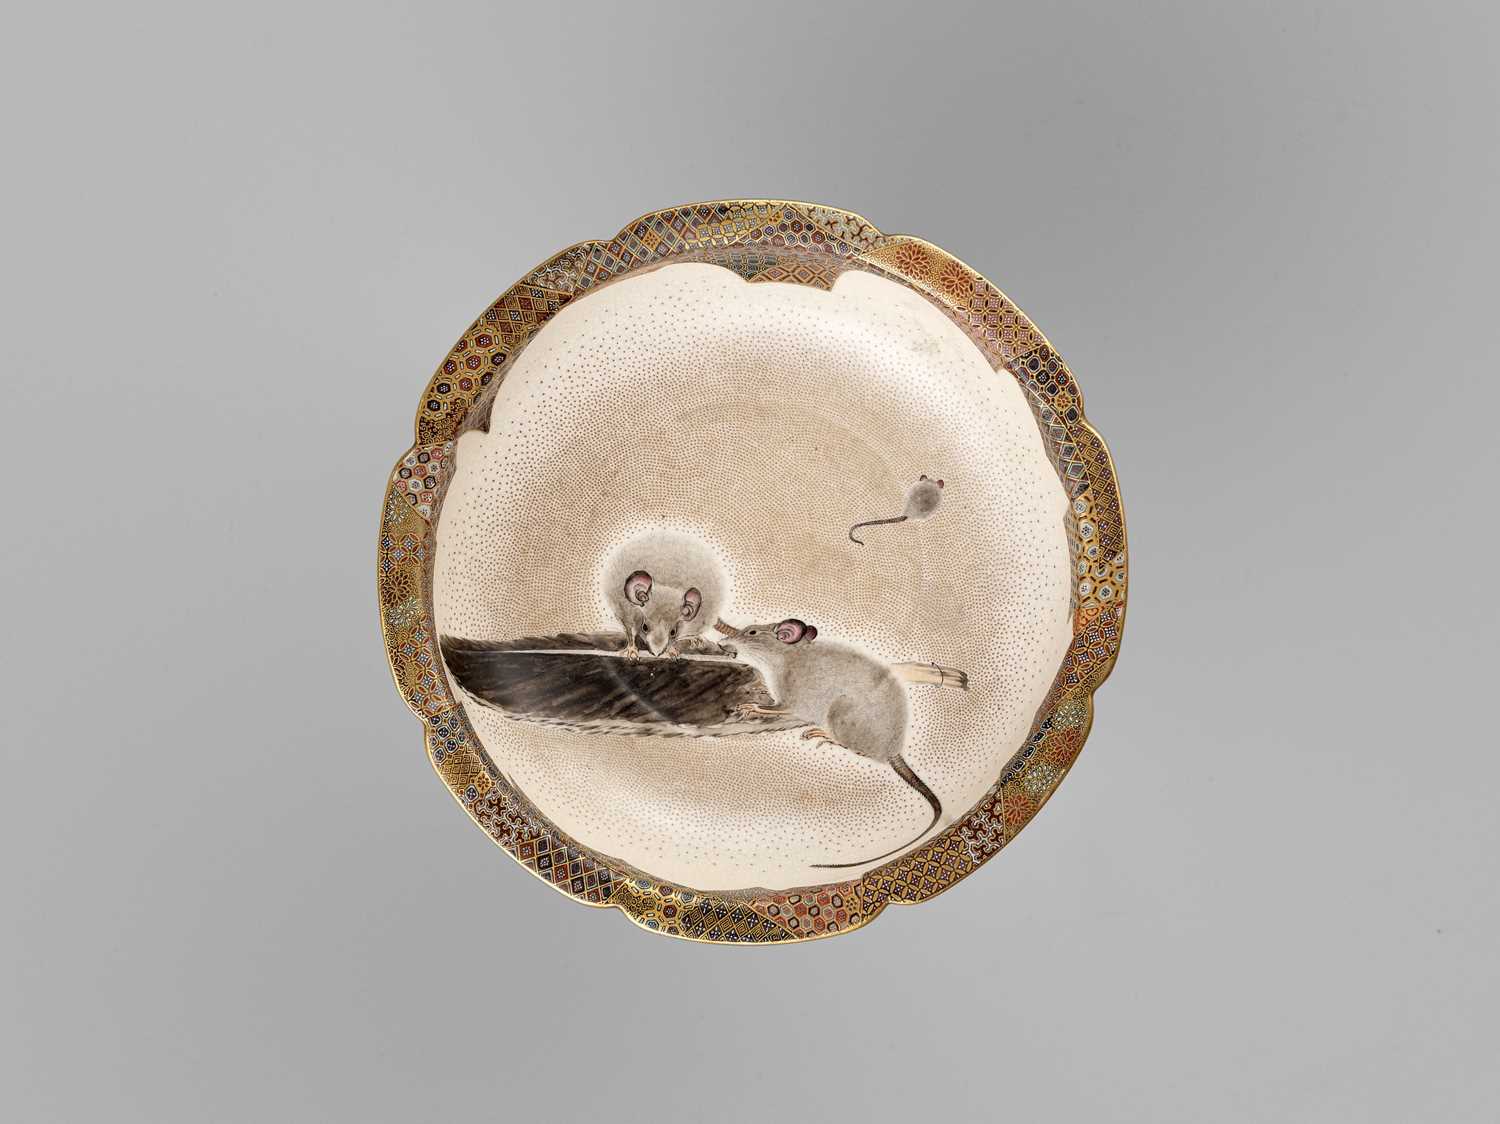 Lot 120 - KINZAN: AN EXCEPTIONAL SATSUMA BOWL WITH RATS GNAWING ON A FEATHER